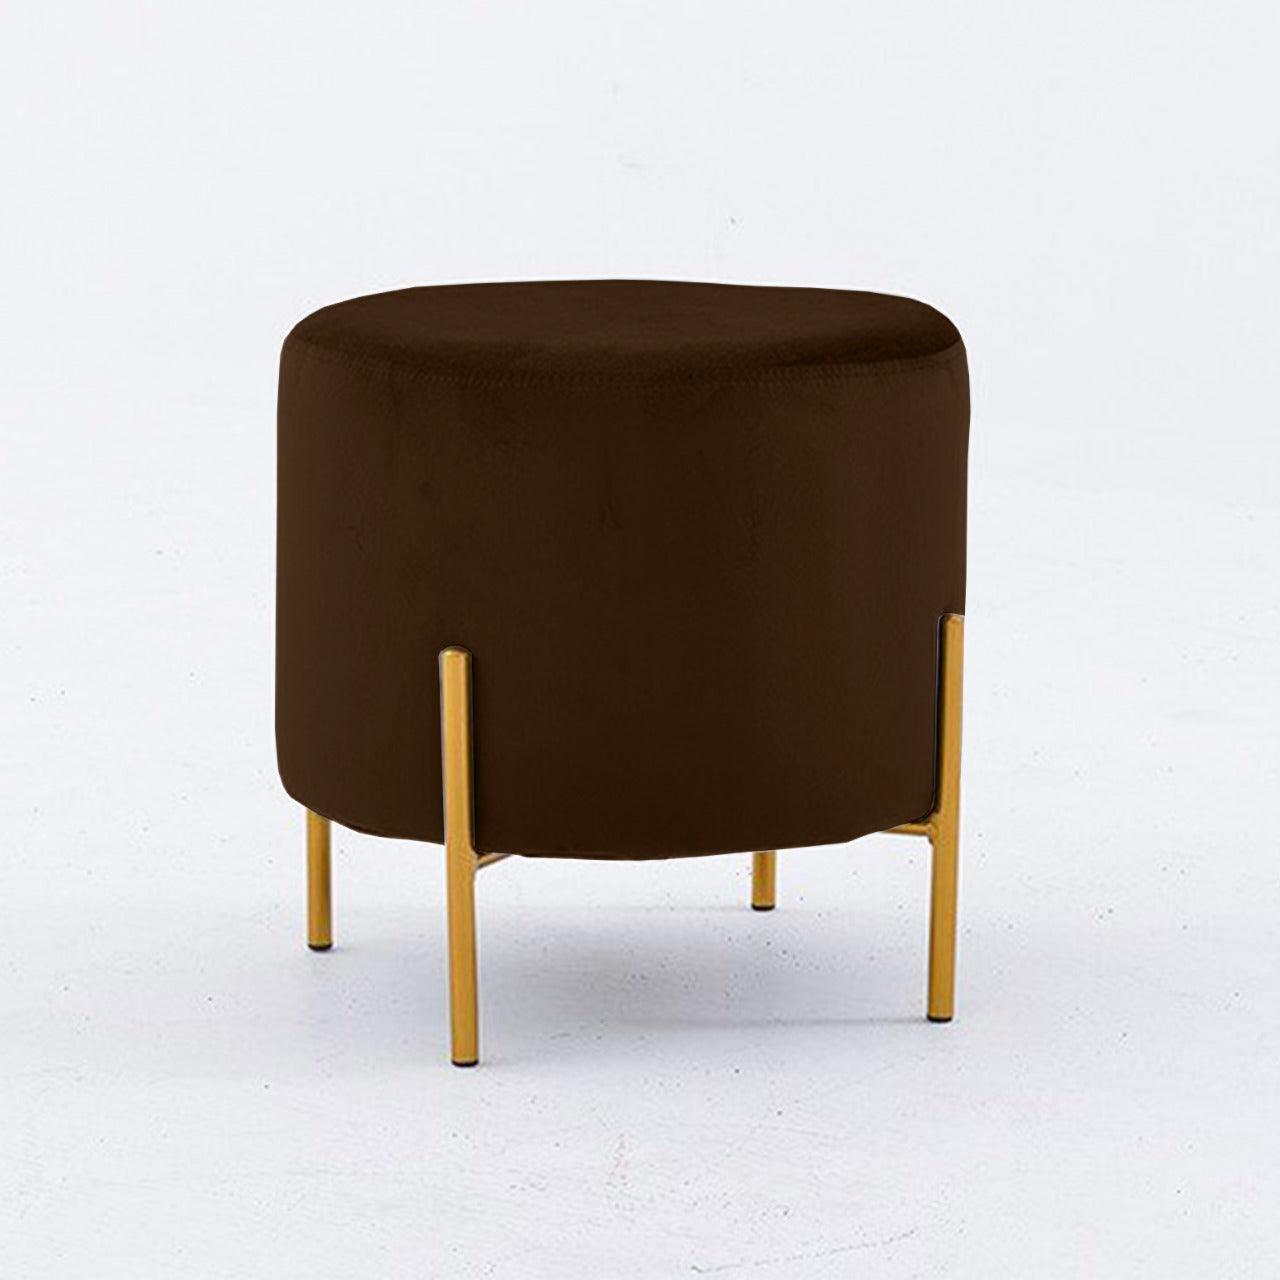 Wooden stool Round shape With Steel Stand - 166 - 92Bedding